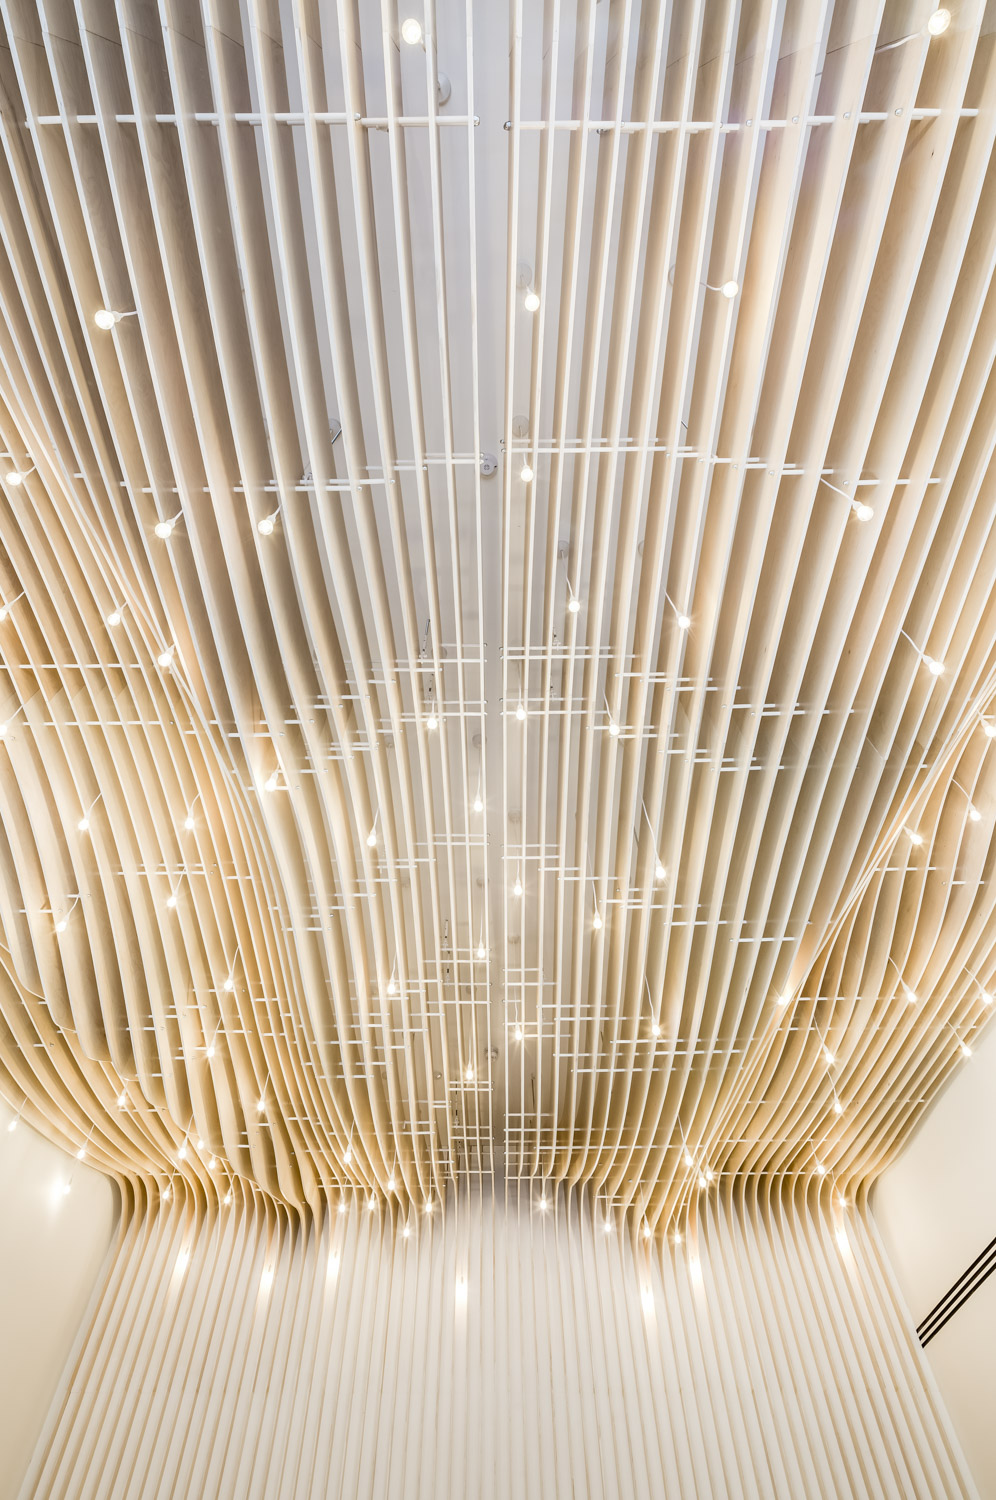 Curved wood structure on the ceiling at 41 Eastcheap Street office, designed by Ben Adams Architects, London, UK.